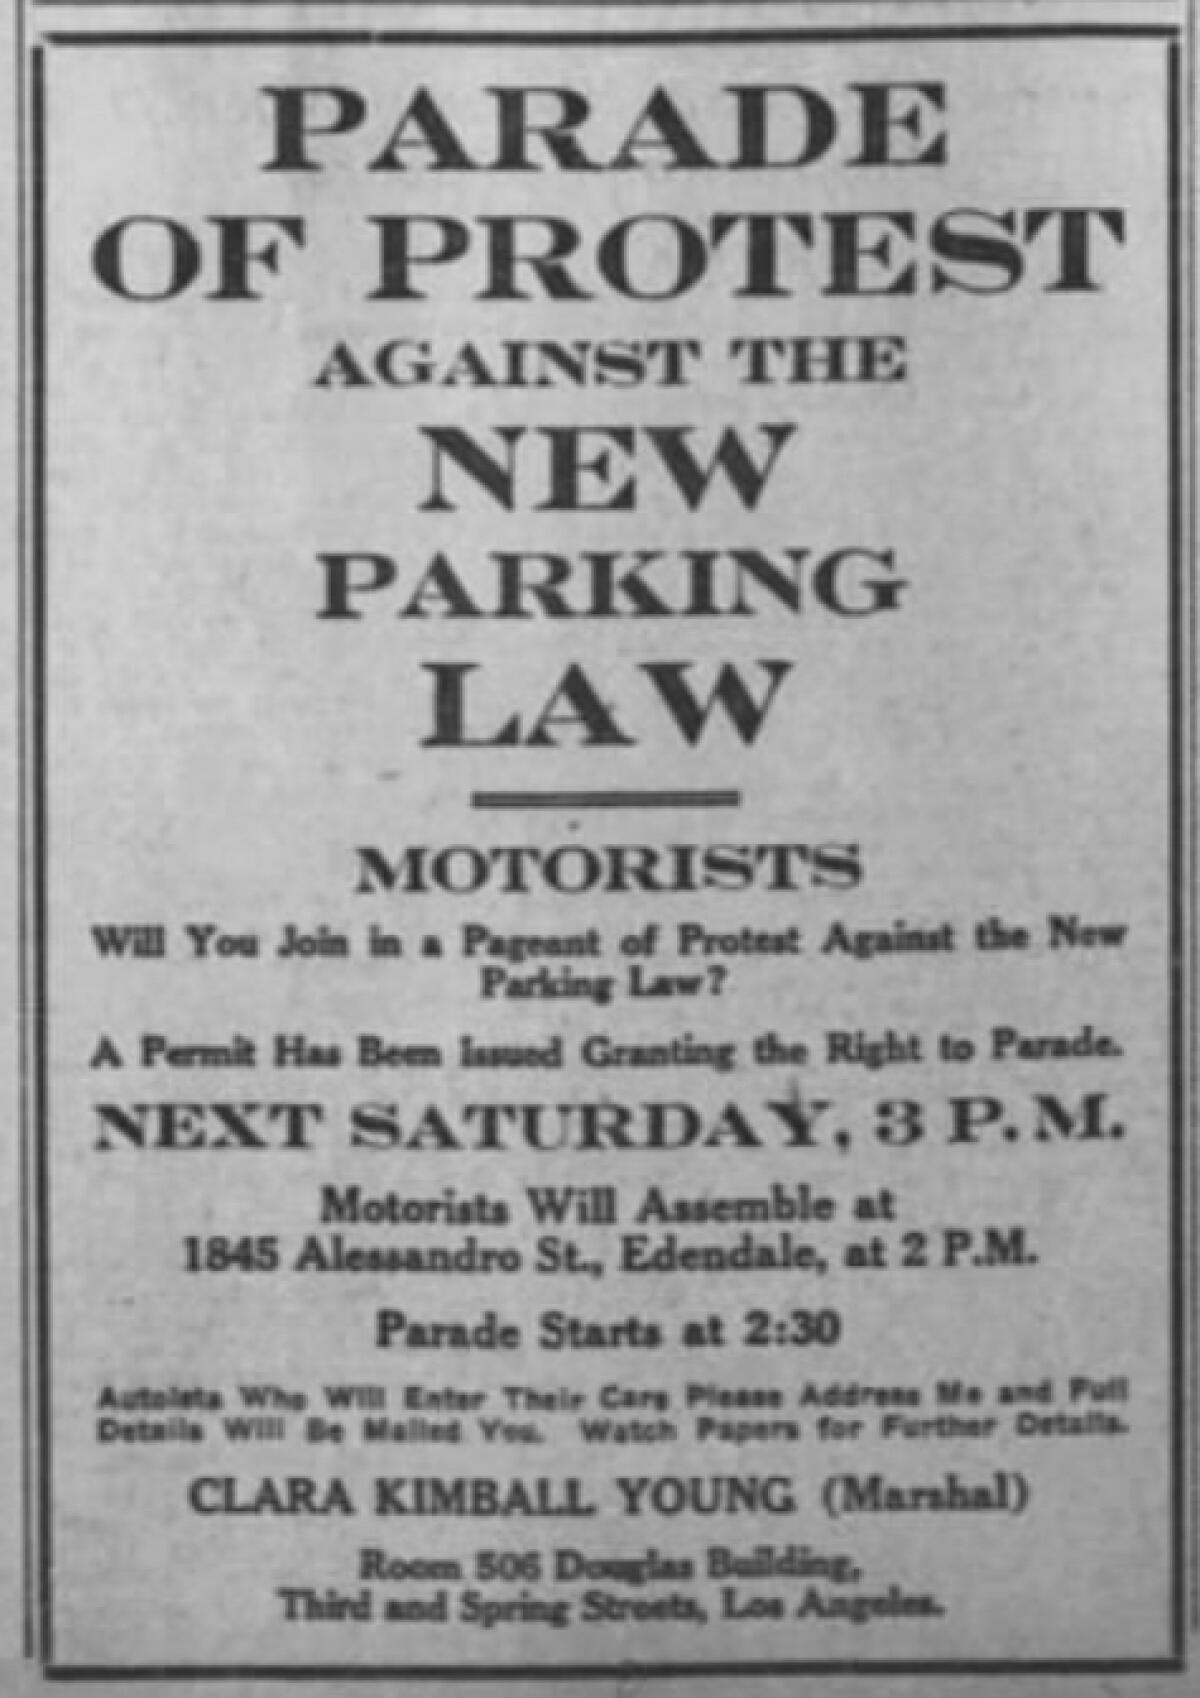 A newspaper ad in 1920 asked motorists to join a "parade of protest against the new parking law."